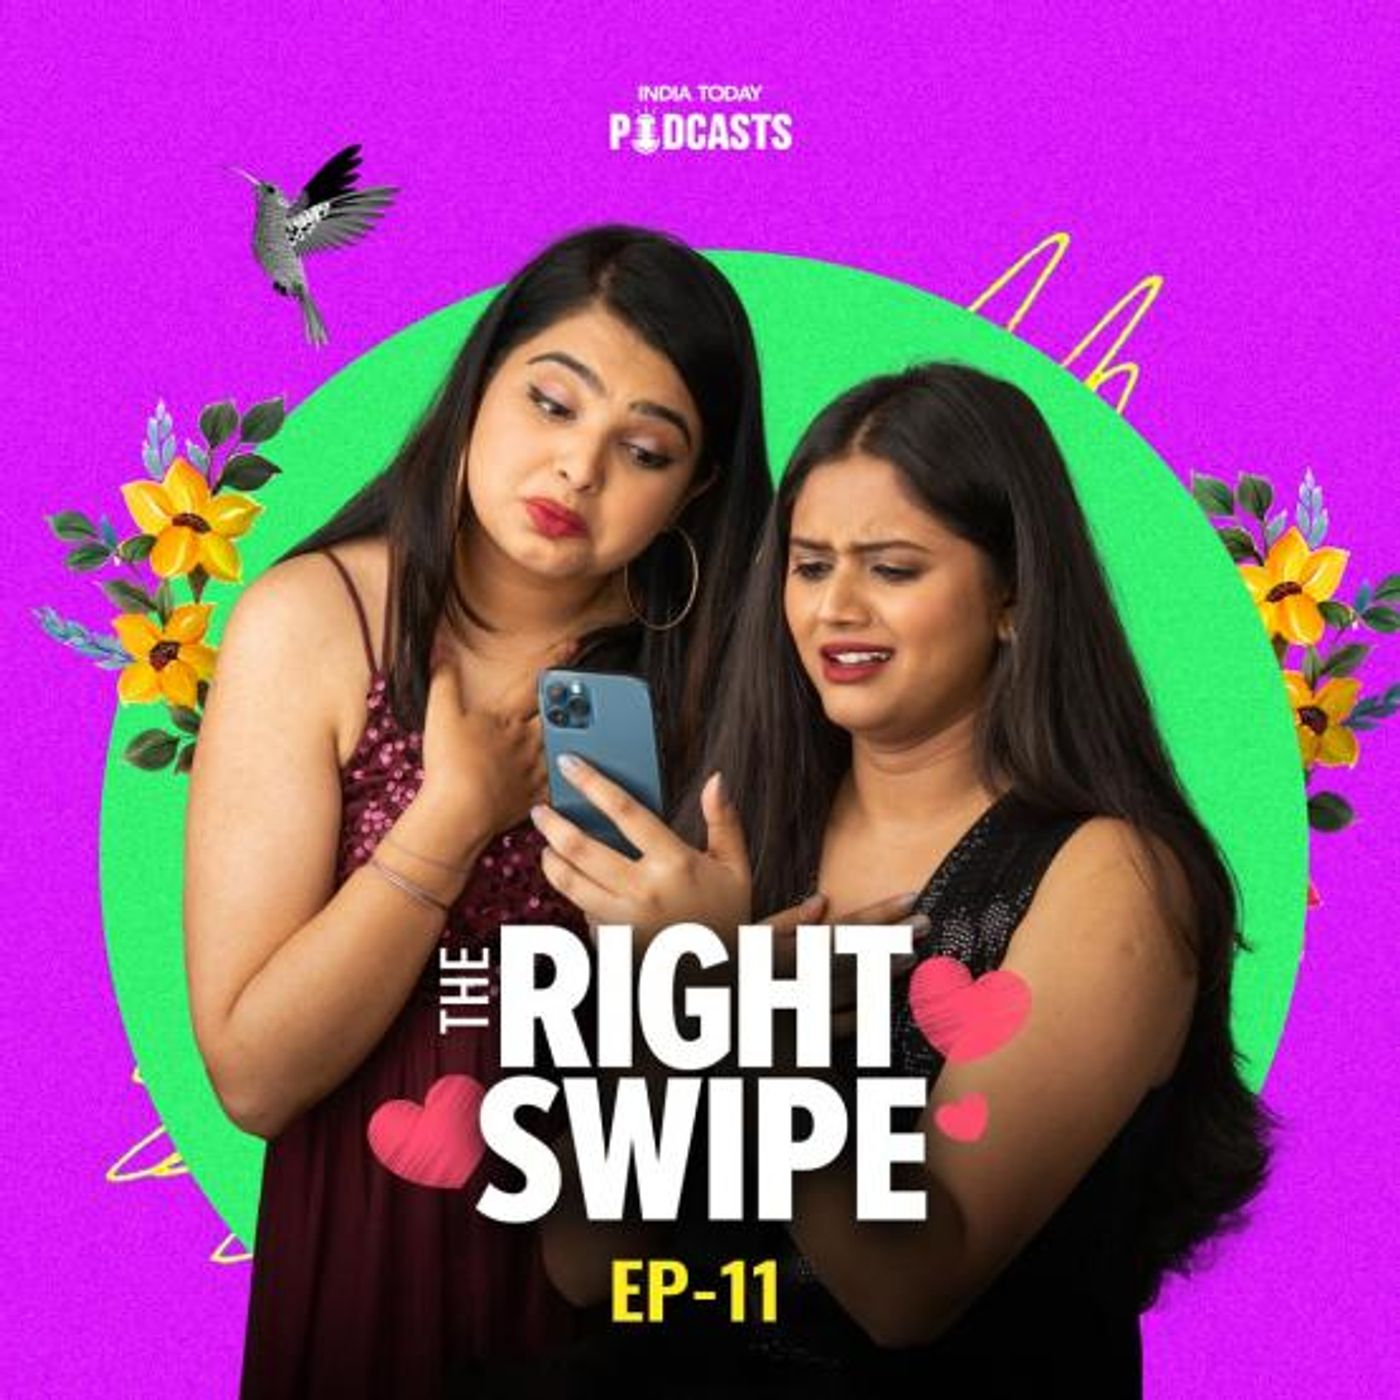 The One Message We Didn't Expect On LinkedIn | The Right Swipe Ep 11